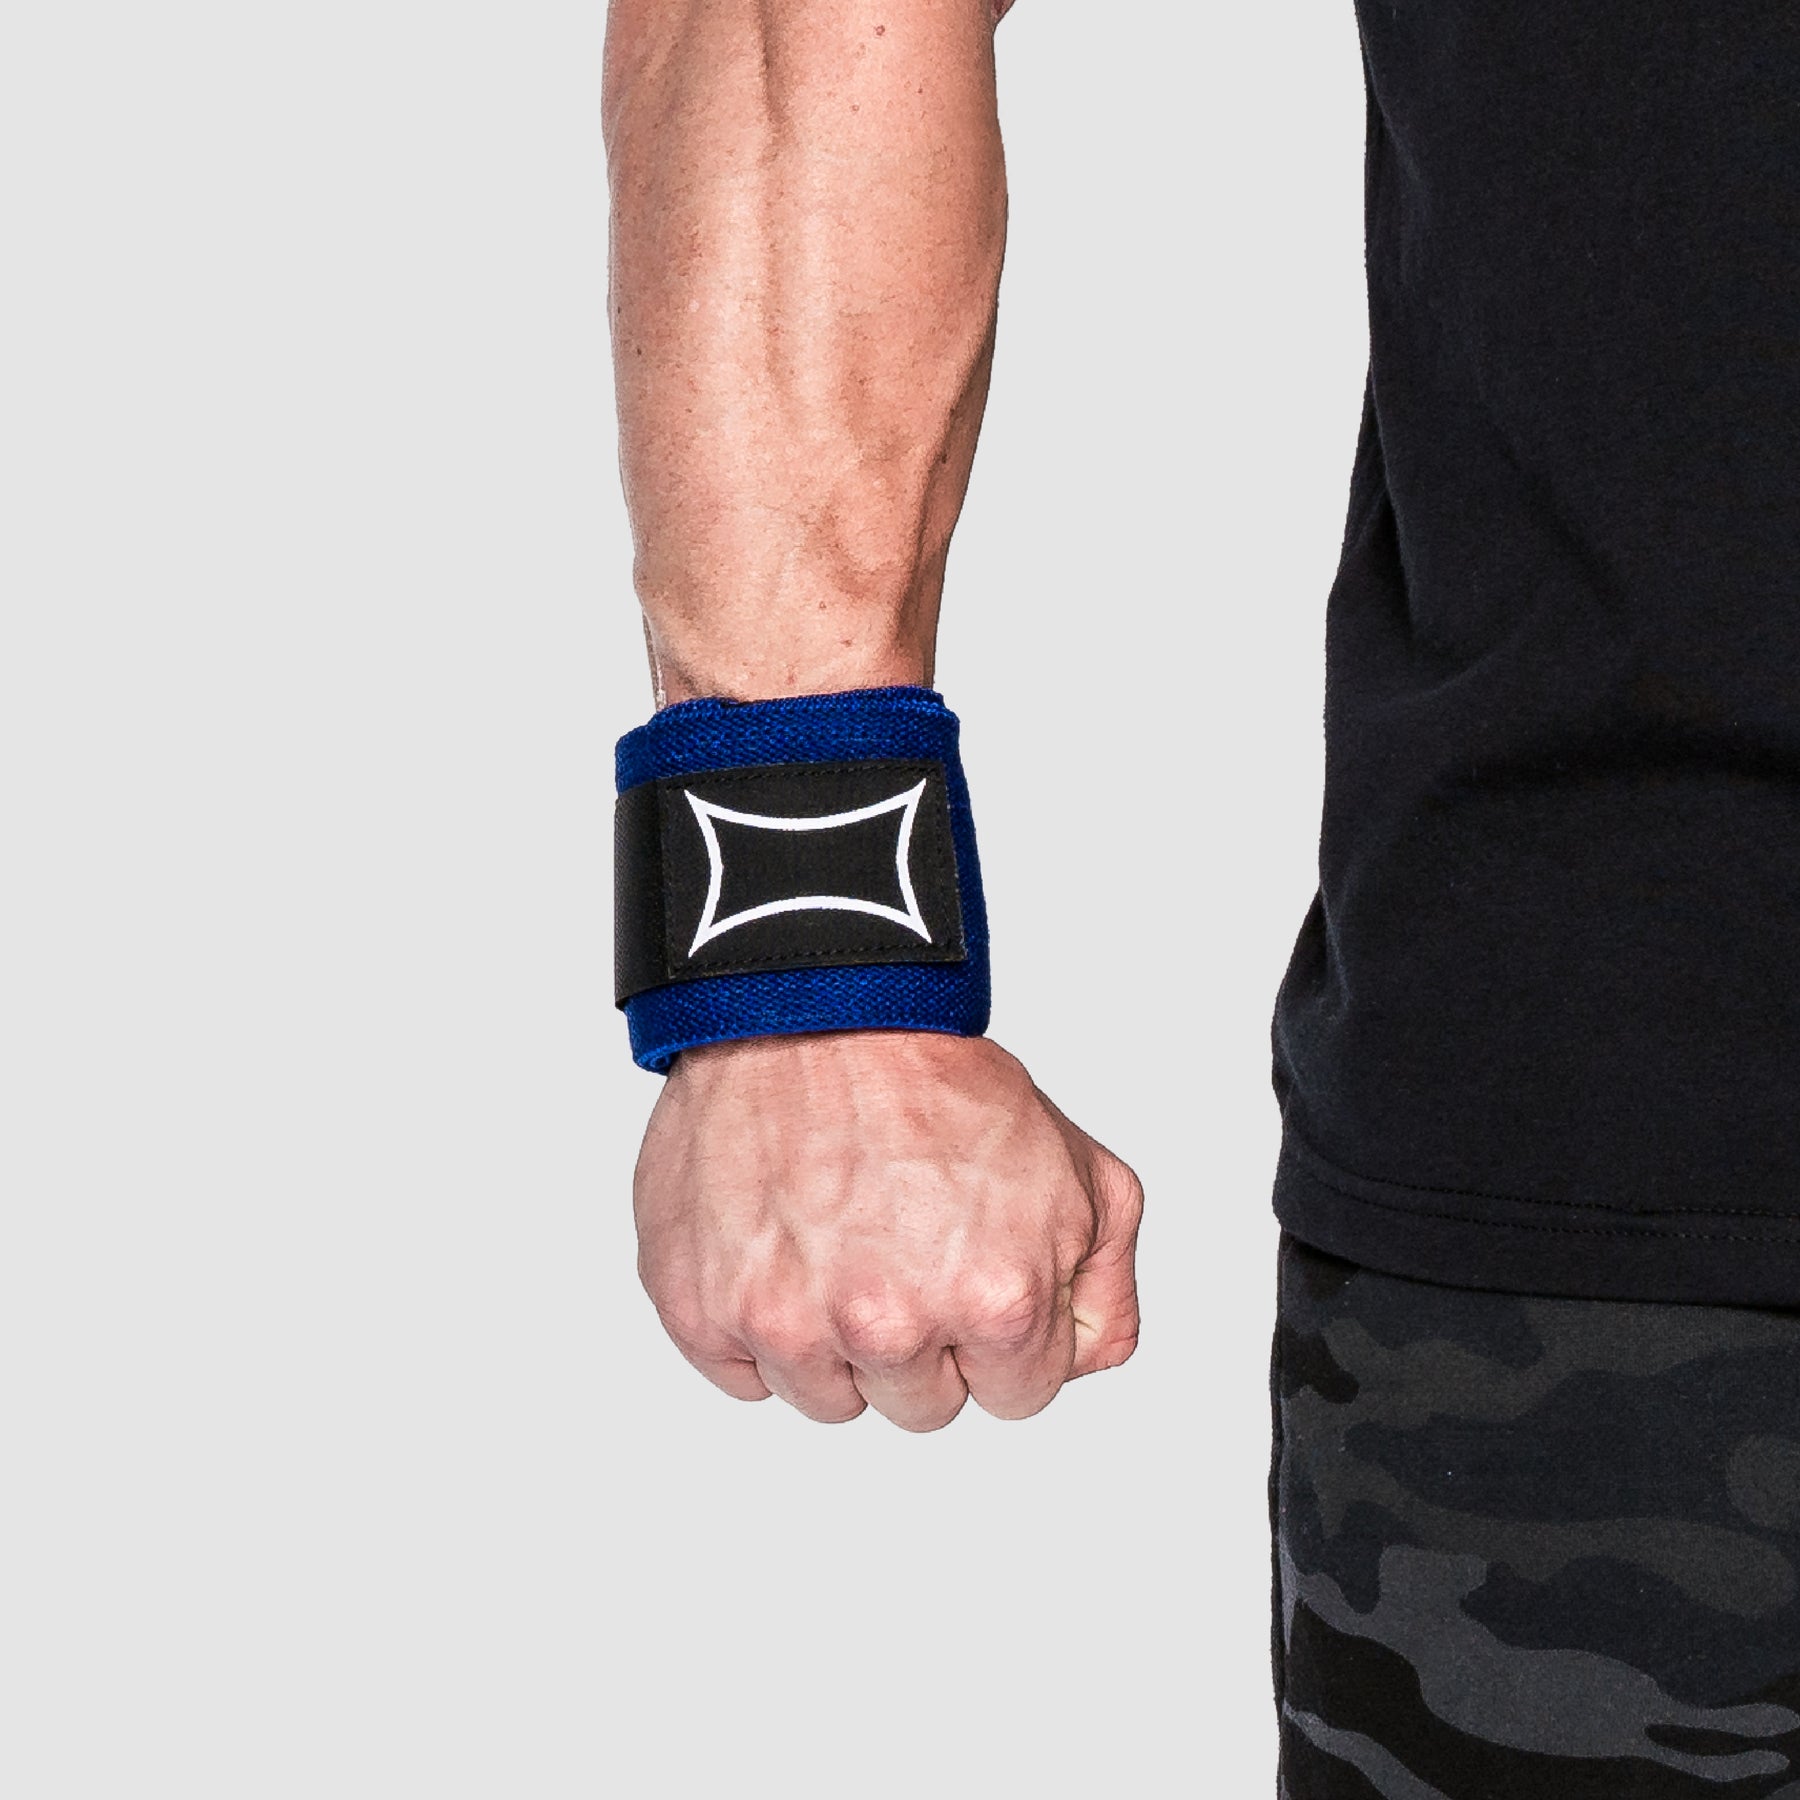  H.G.T Wrist Straps for Weight Lifting - Weight Lifting - Wrist  Wraps Weightlifting - Weightlifting Straps - Weight Lifting Wrist Wraps -  Gym Wrist Straps - Gym Wrap - Gym